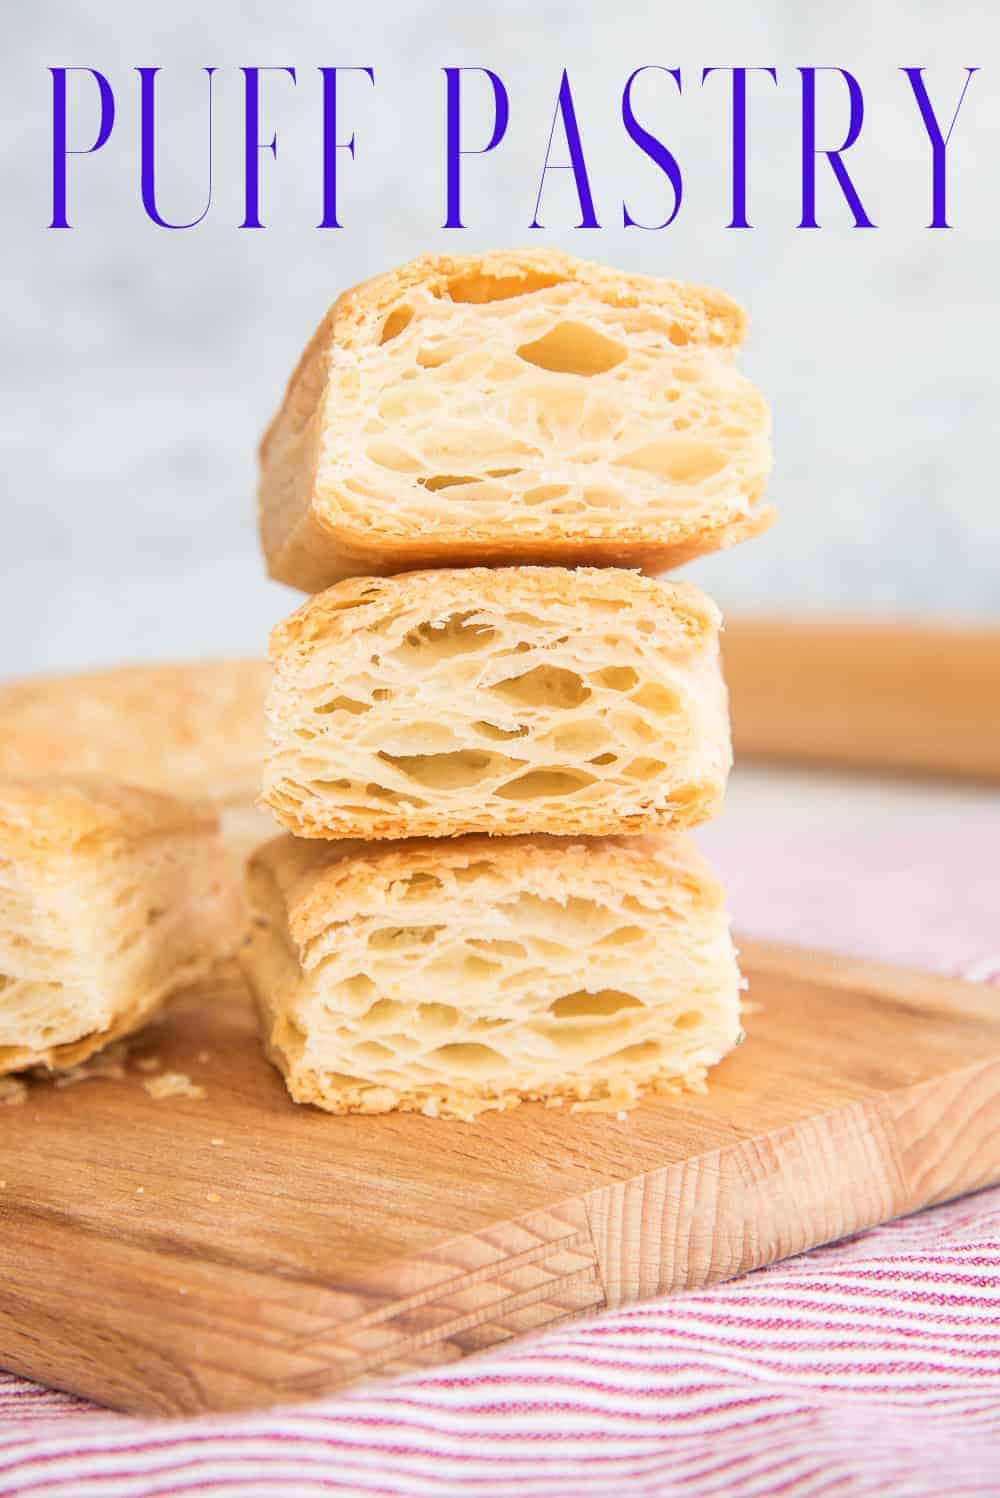 Puff Pastry is a workhorse in the culinary world. Learn how to make this classic European dough and use it in your sweet and savory recipes. This recipe is freezer-friendly and makes four portions of dough which is enough for four recipes. #puffpastry #puffpastrydough #Europeanpastries #pastries #Quesitos #turnovers #beefwellington #savorypastries #breakfastpastries #dessertpastries #doughrecipe via @ediblesense